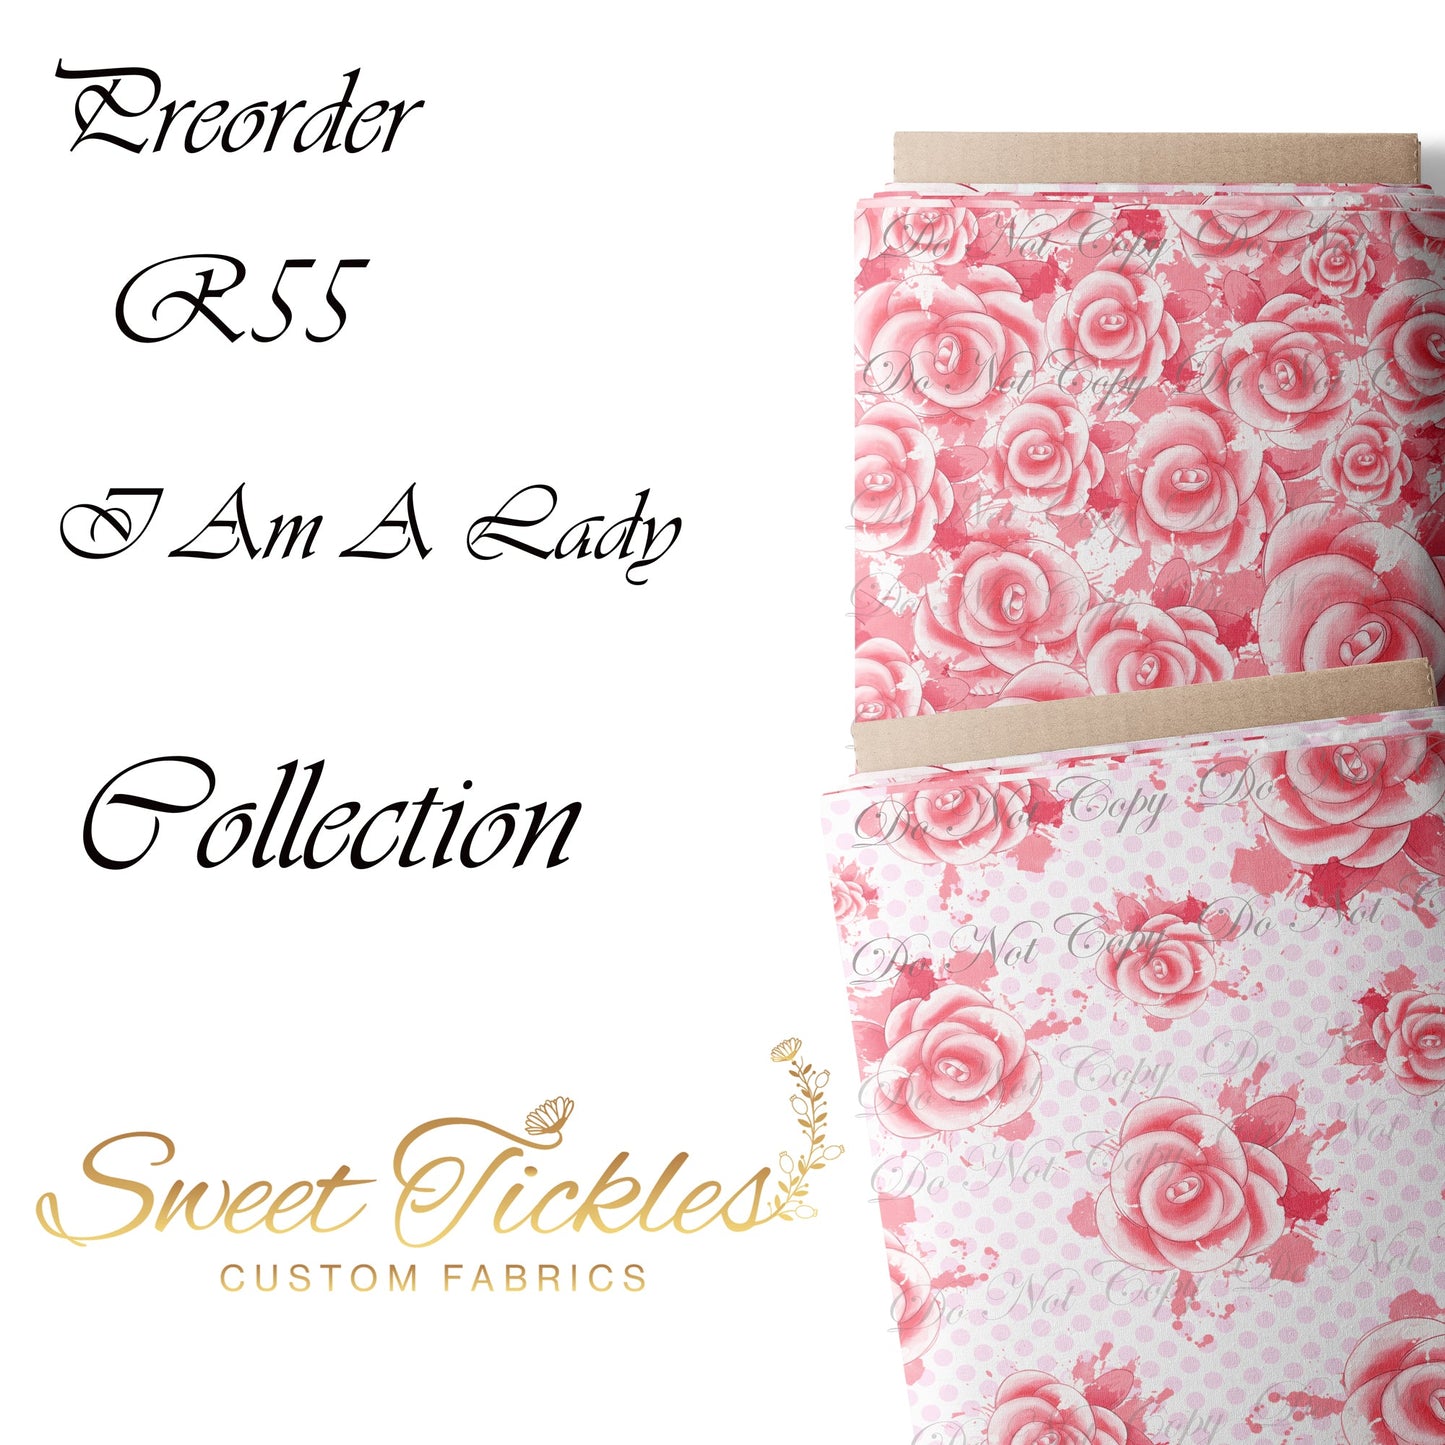 Preorder R55-  I Am A Lady  - Coordinate Roses  -Small Scale